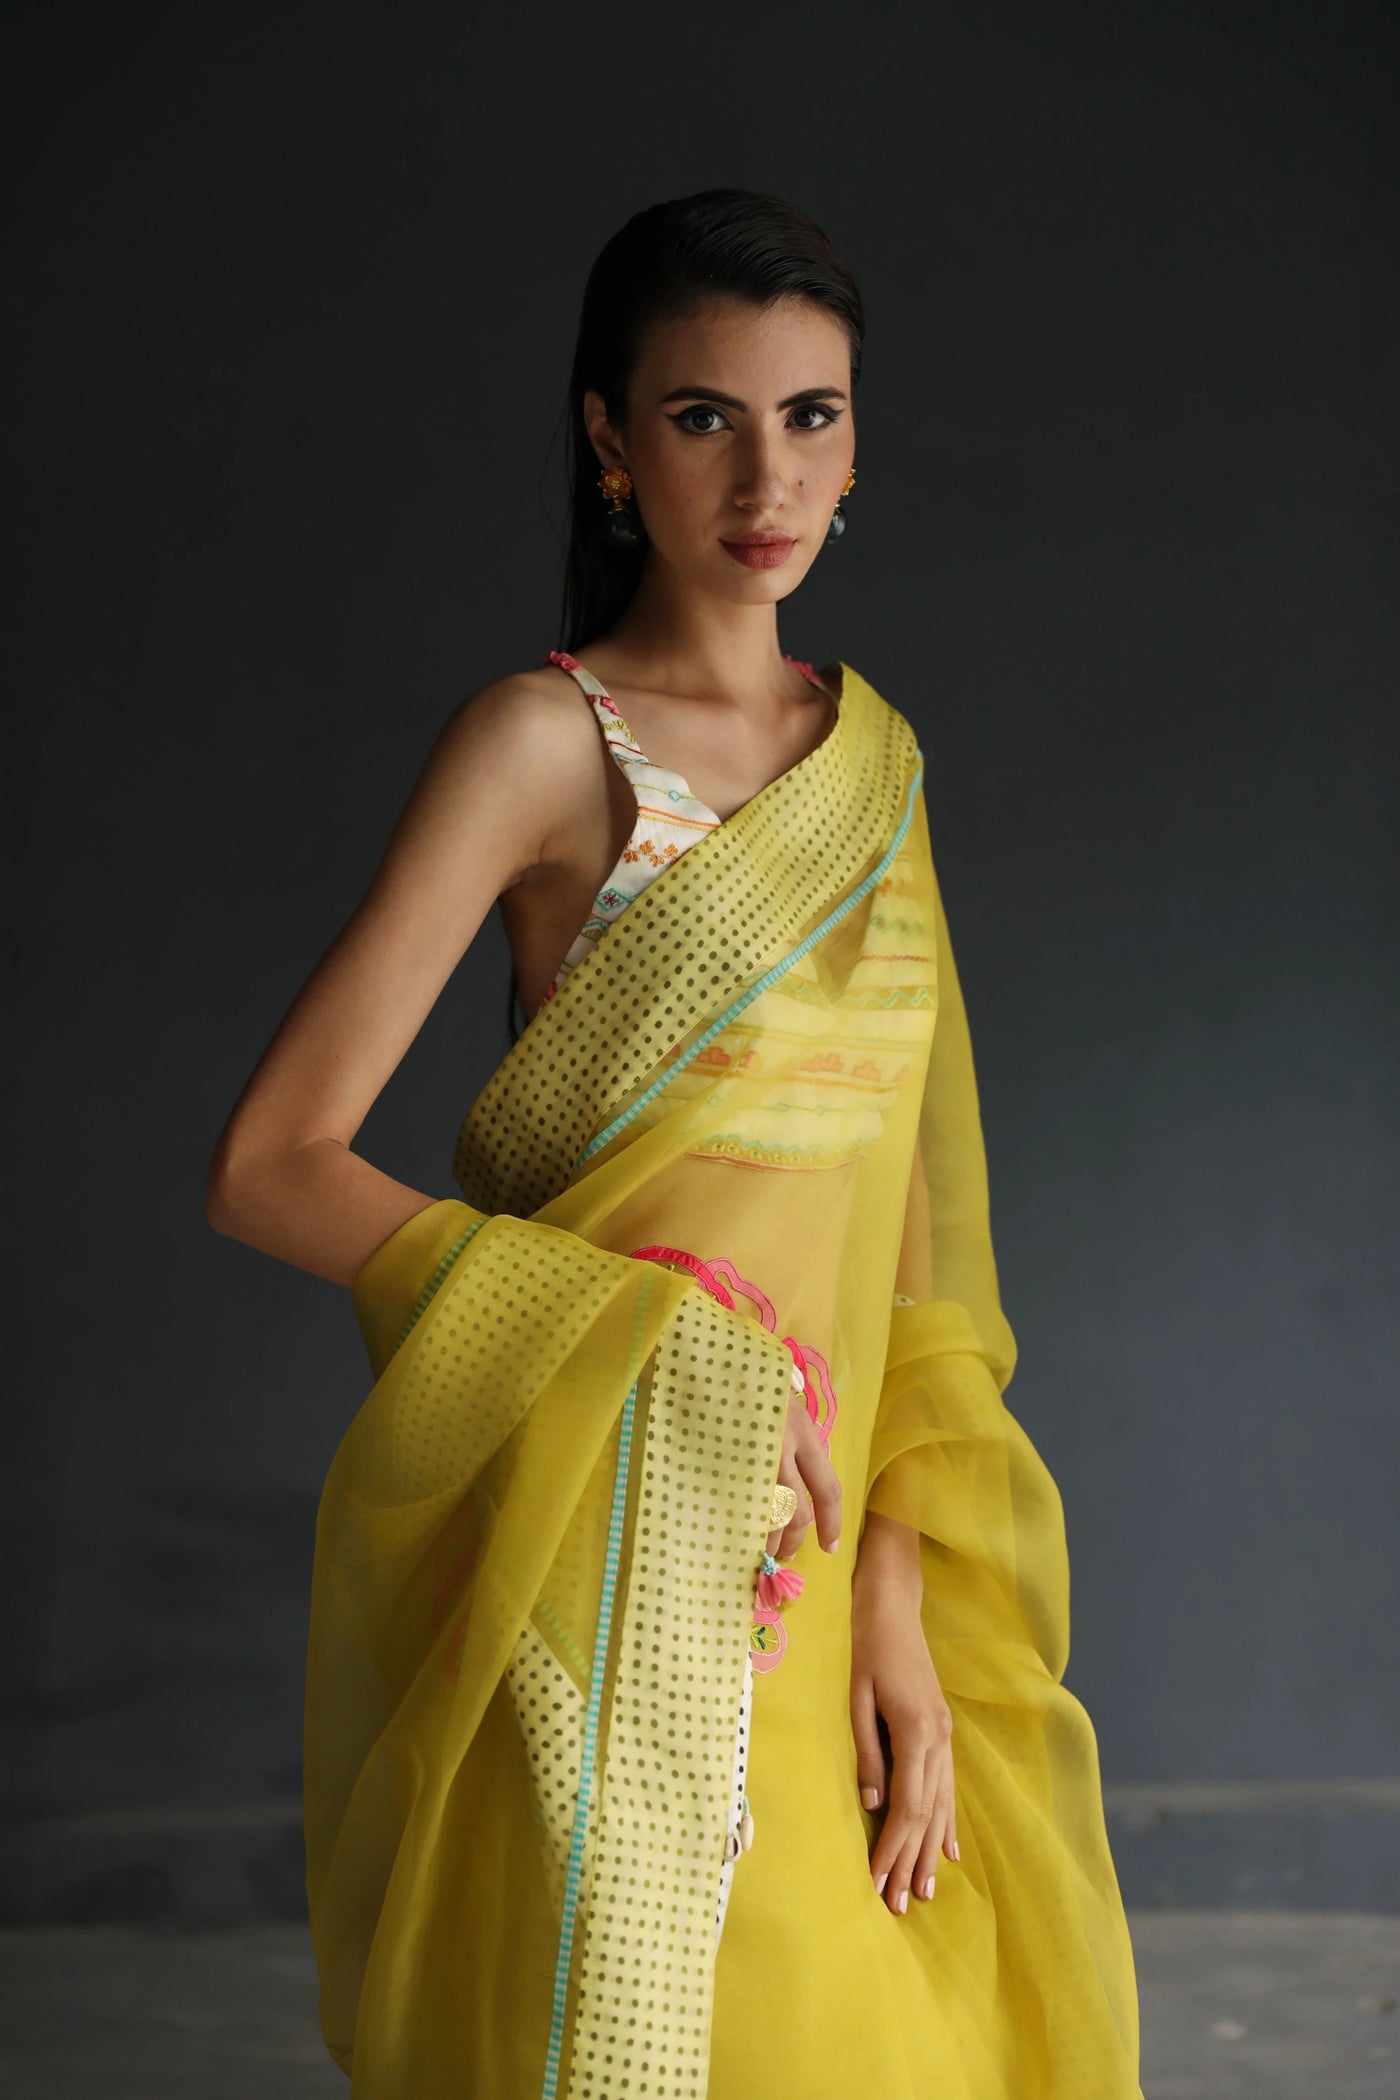 Yellow Flower Organza Saree - Indian Clothing in Denver, CO, Aurora, CO, Boulder, CO, Fort Collins, CO, Colorado Springs, CO, Parker, CO, Highlands Ranch, CO, Cherry Creek, CO, Centennial, CO, and Longmont, CO. Nationwide shipping USA - India Fashion X